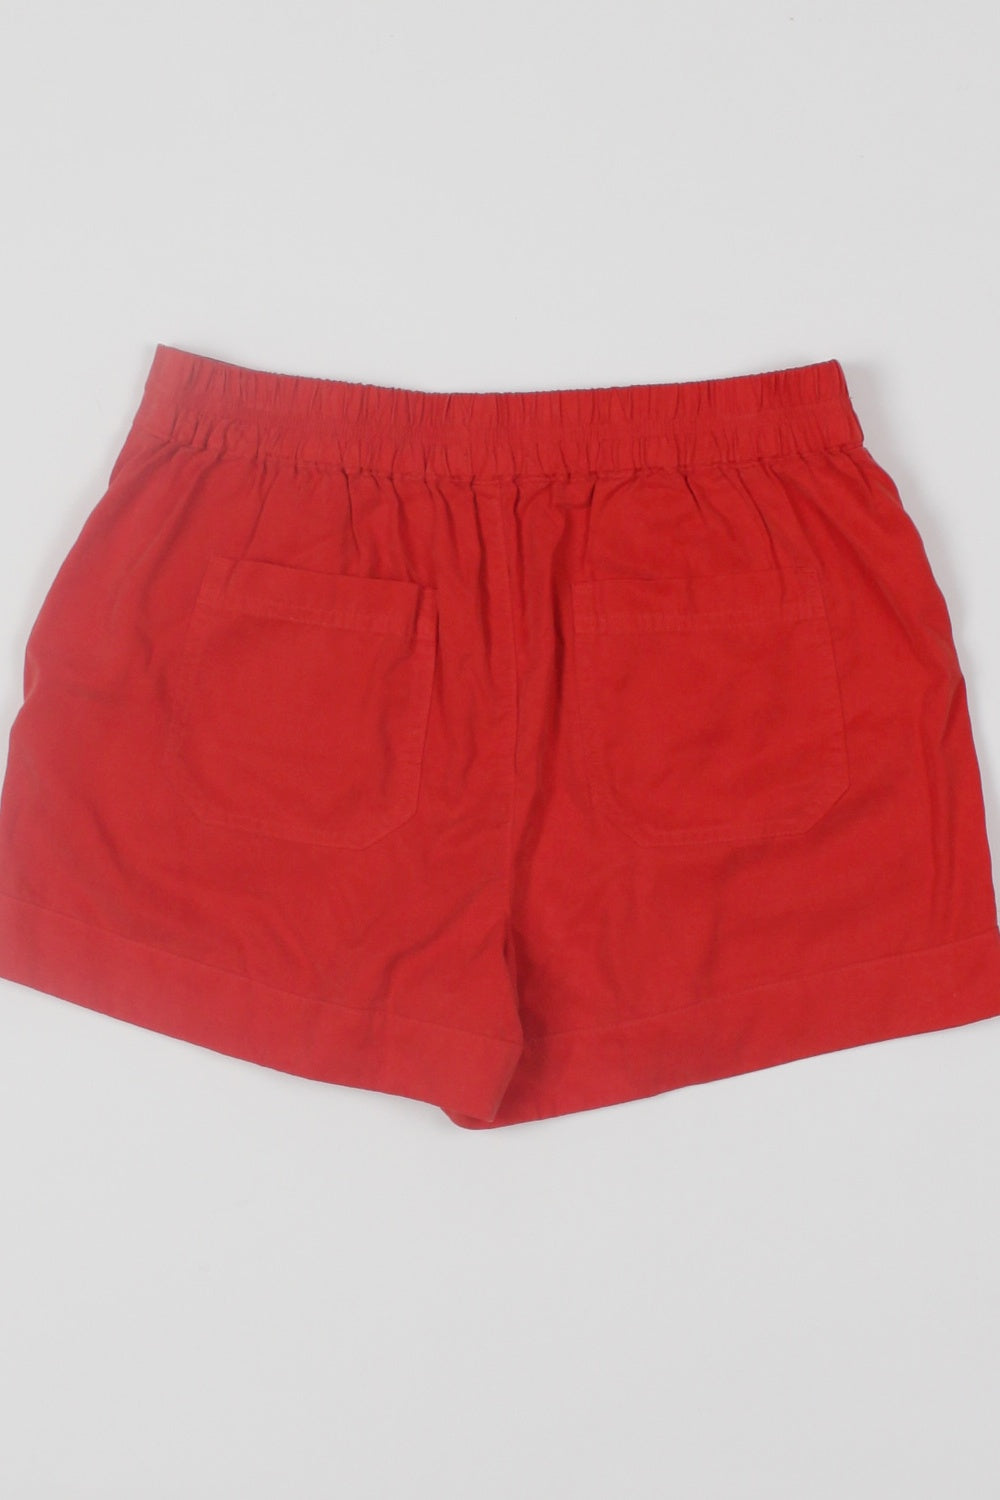 Witchery Red Shorts 8